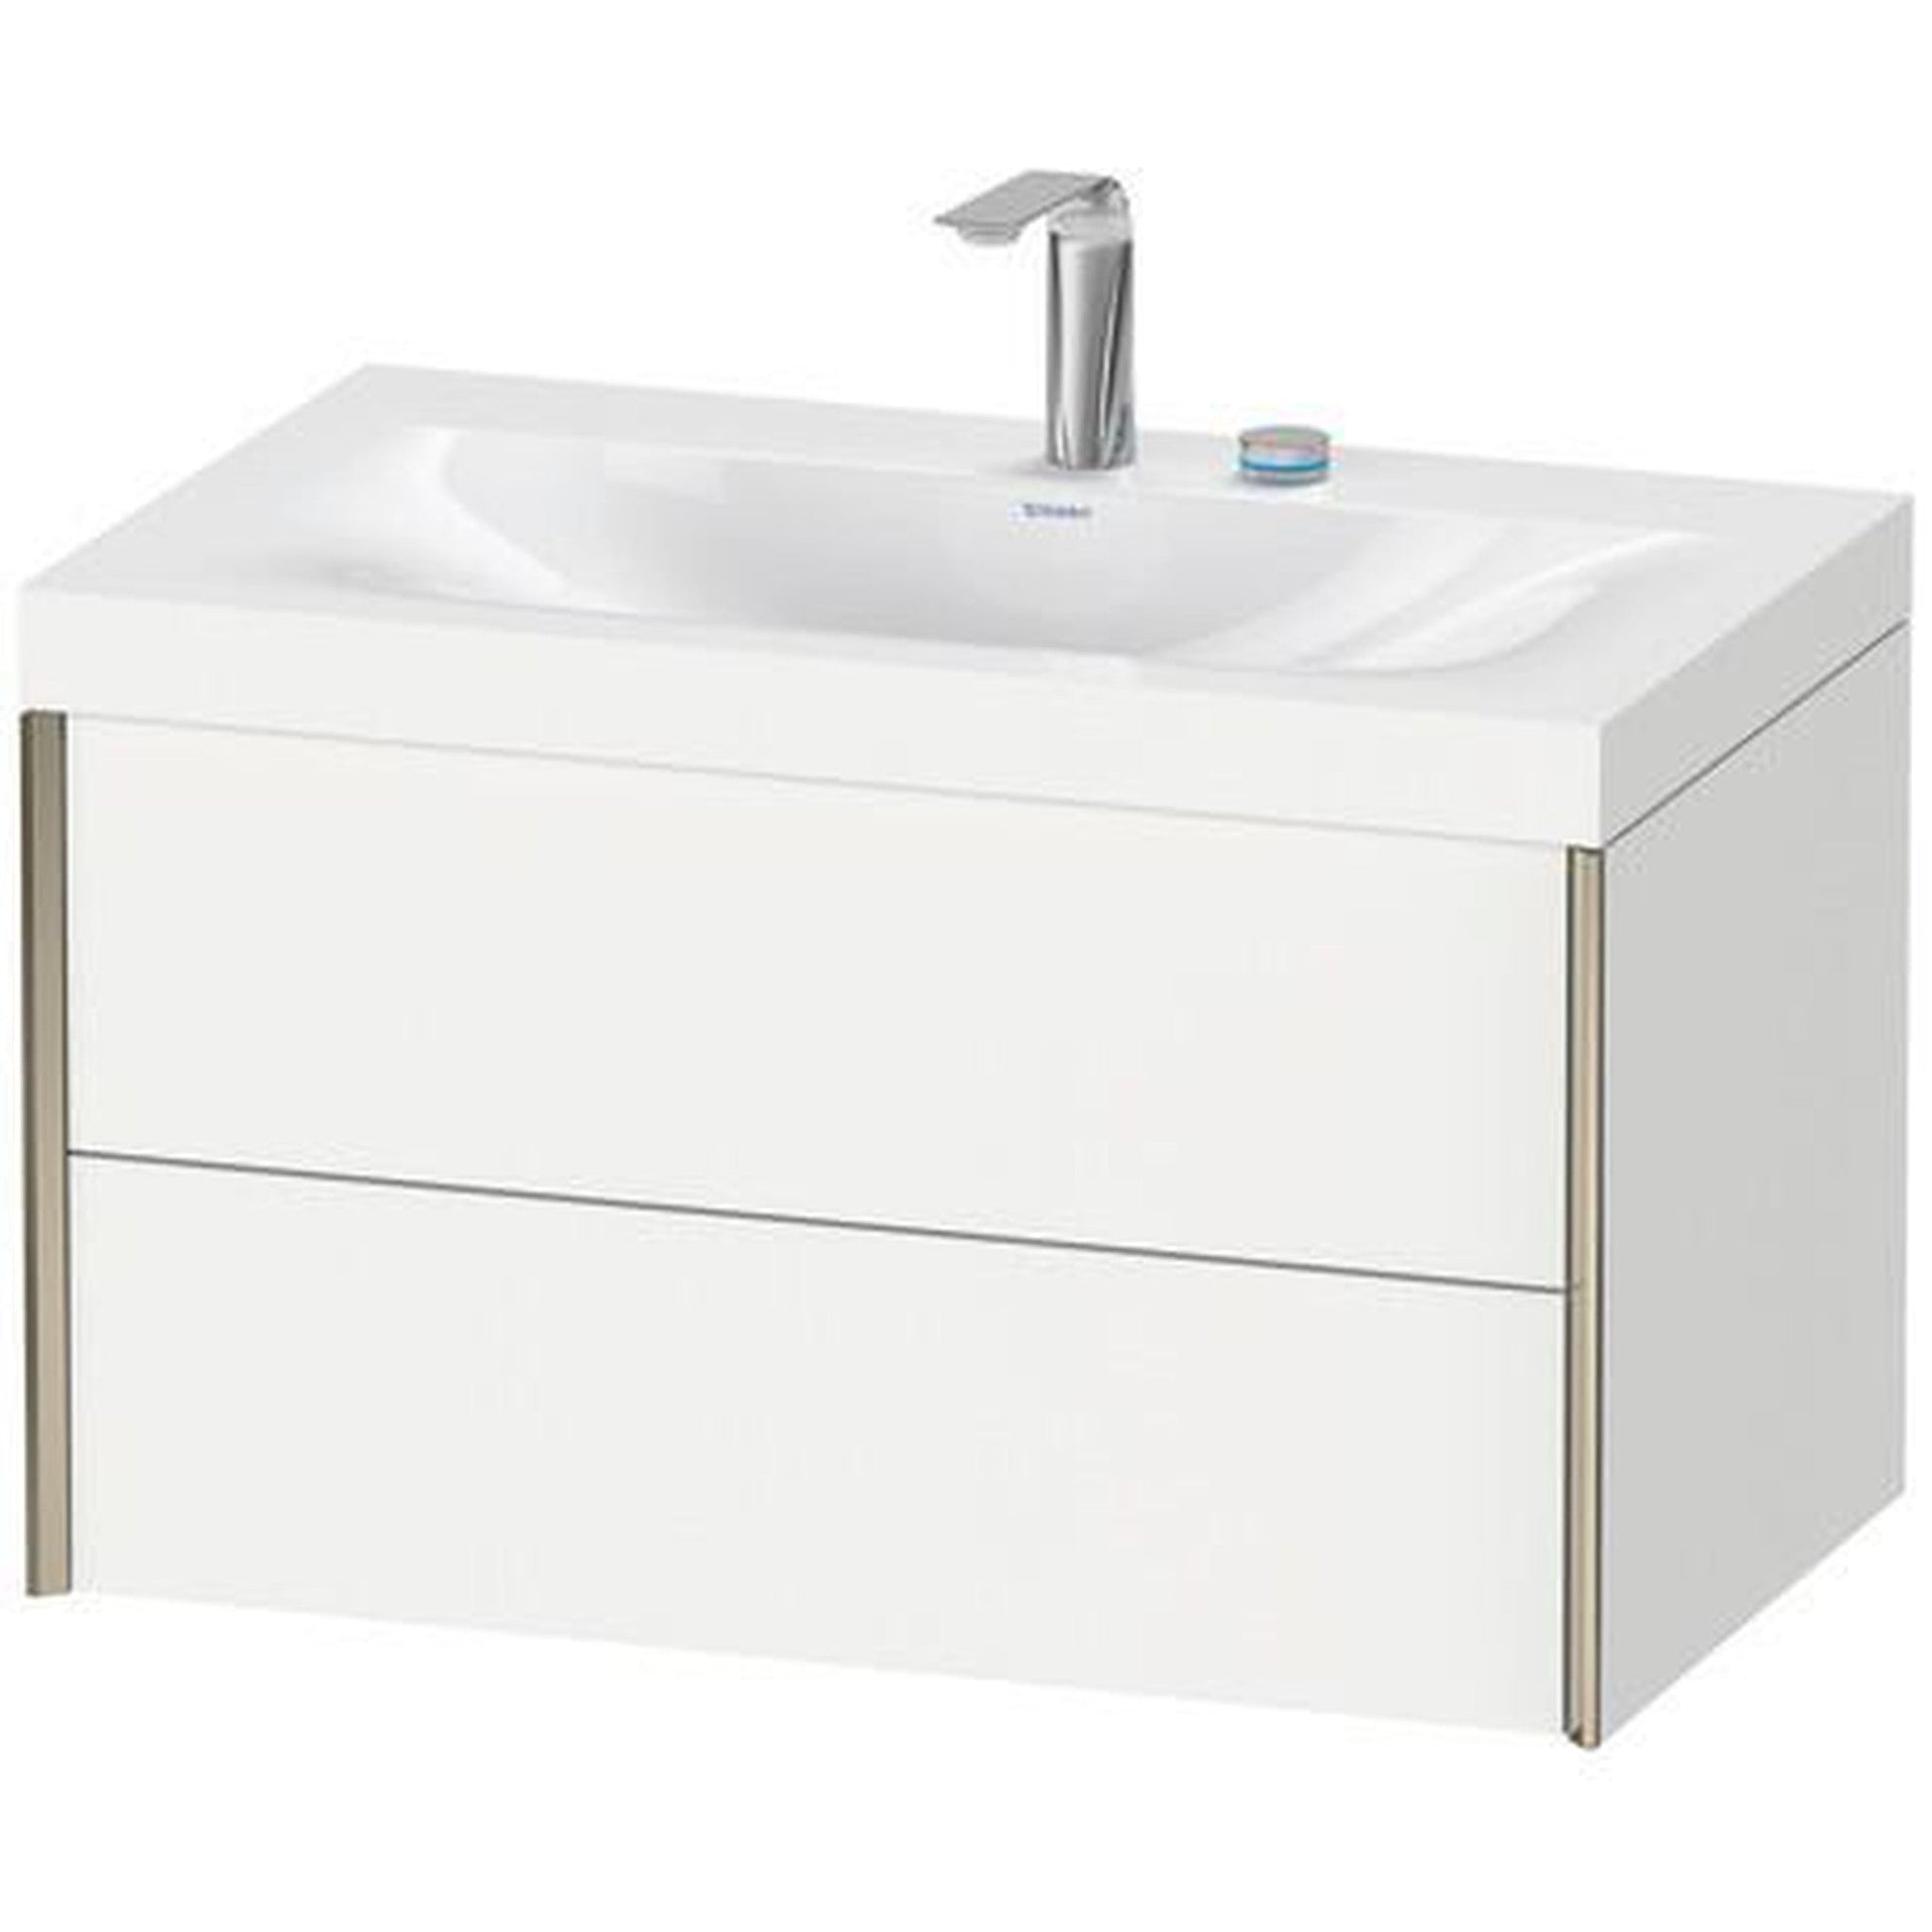 Duravit Xviu 31" x 20" x 19" Two Drawer C-Bonded Wall-Mount Vanity Kit With Two Tap Holes, Taupe (XV4615EB291P)